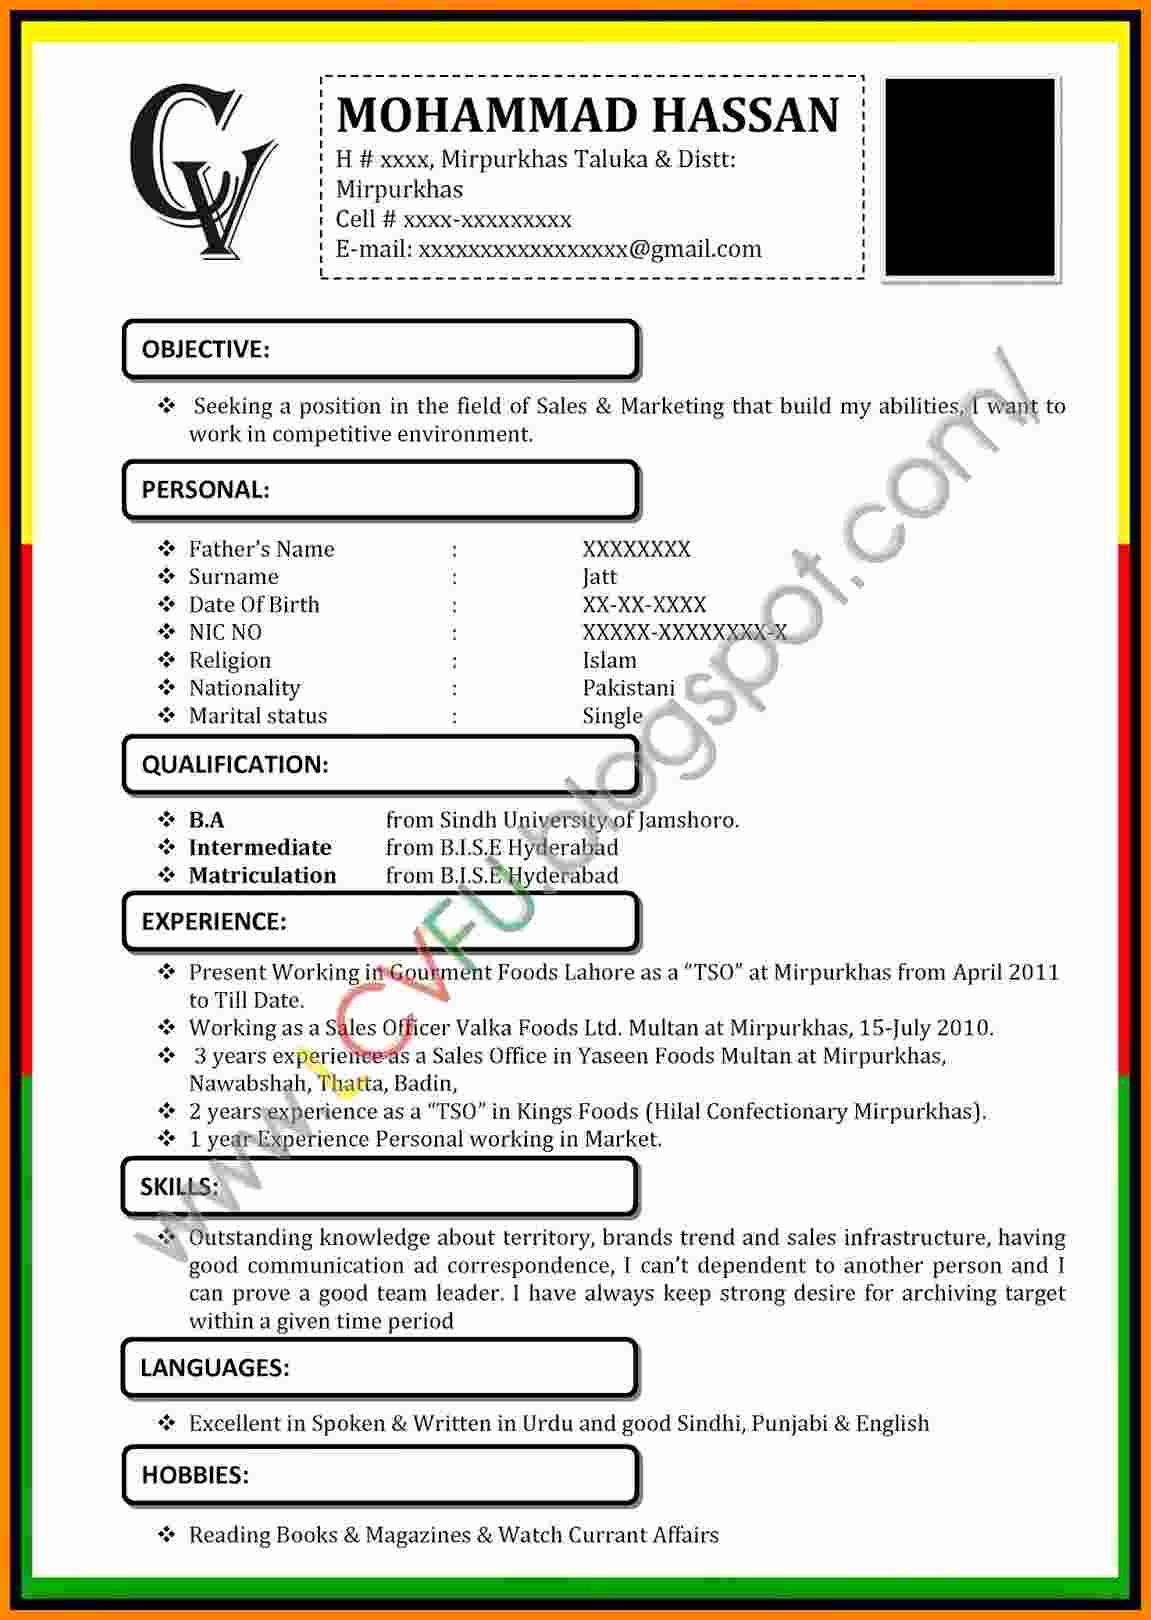 Resume Template Ms Word 2007 New 9 Cv format Ms Word 2007